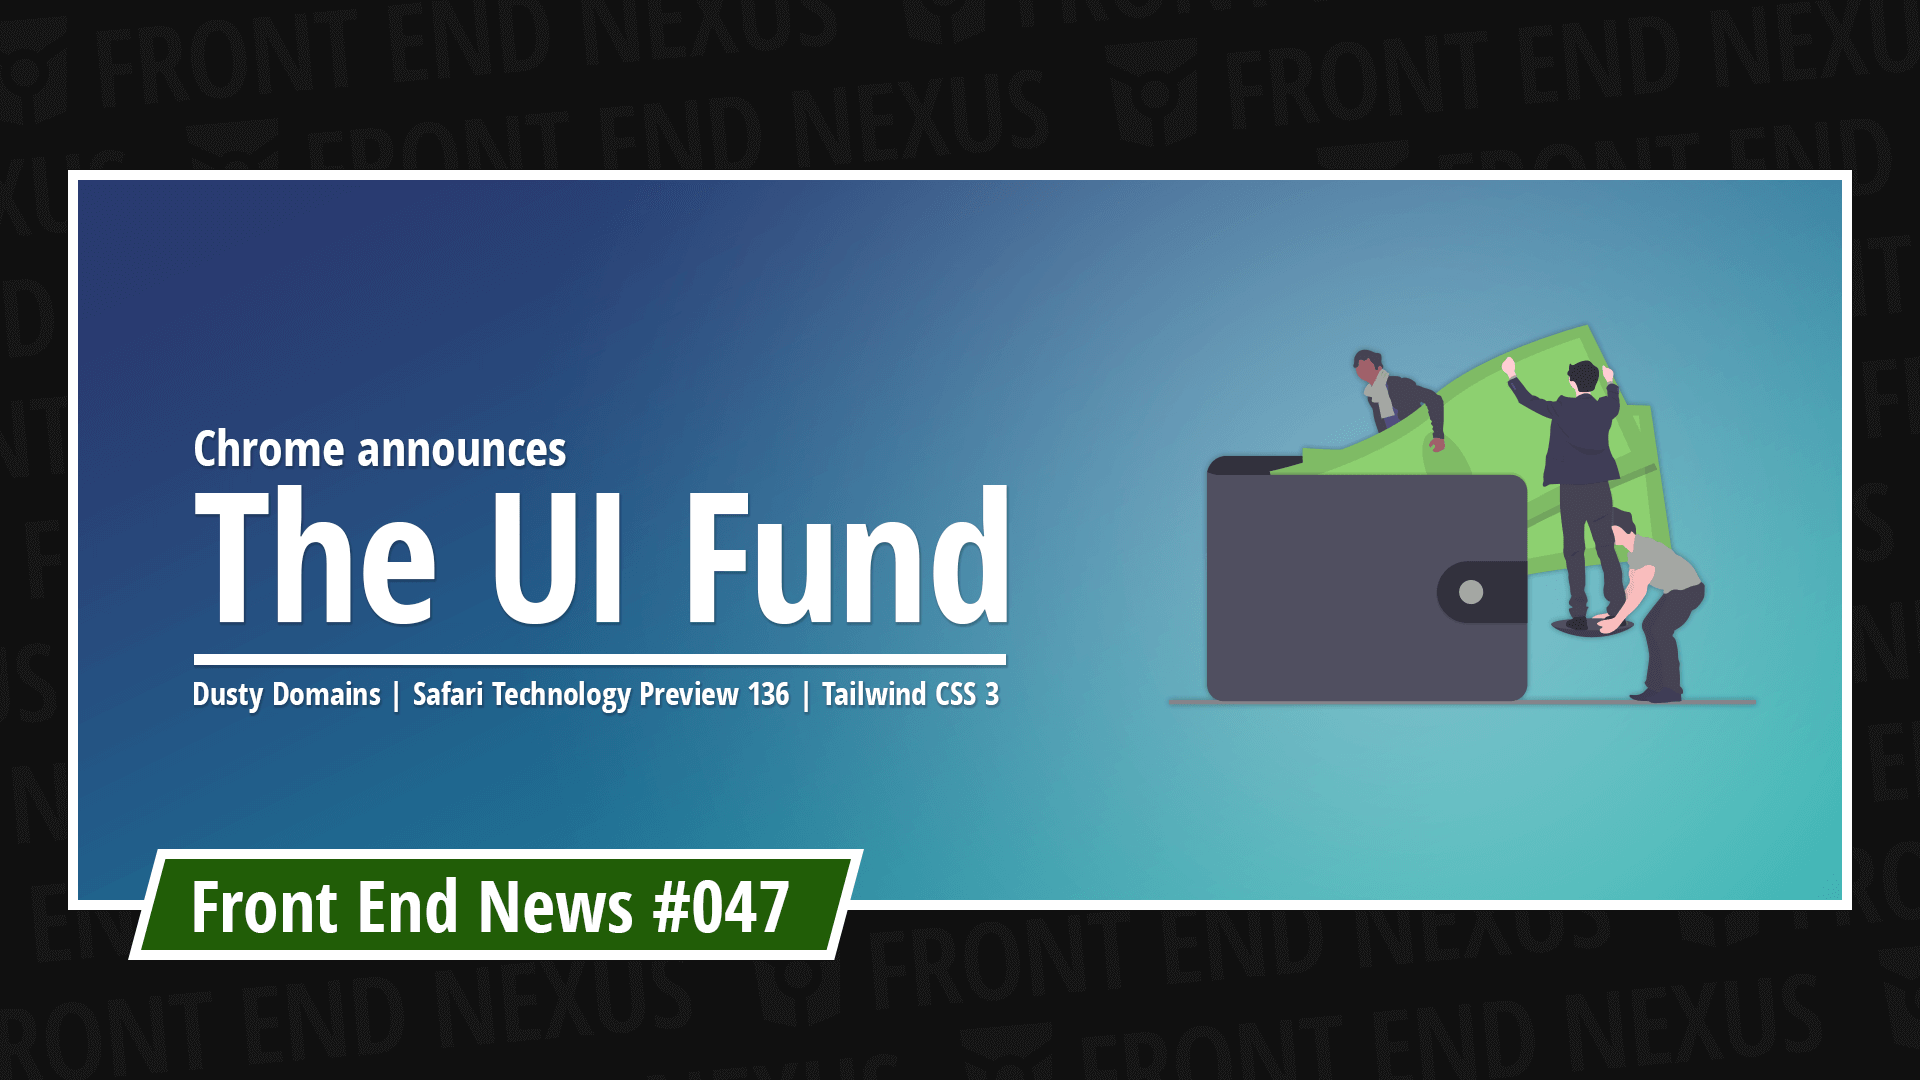 Announcing the UI fund, Dusty Domains, Safari Technology Preview 136, and Tailwind CSS 3 | Front End News #047